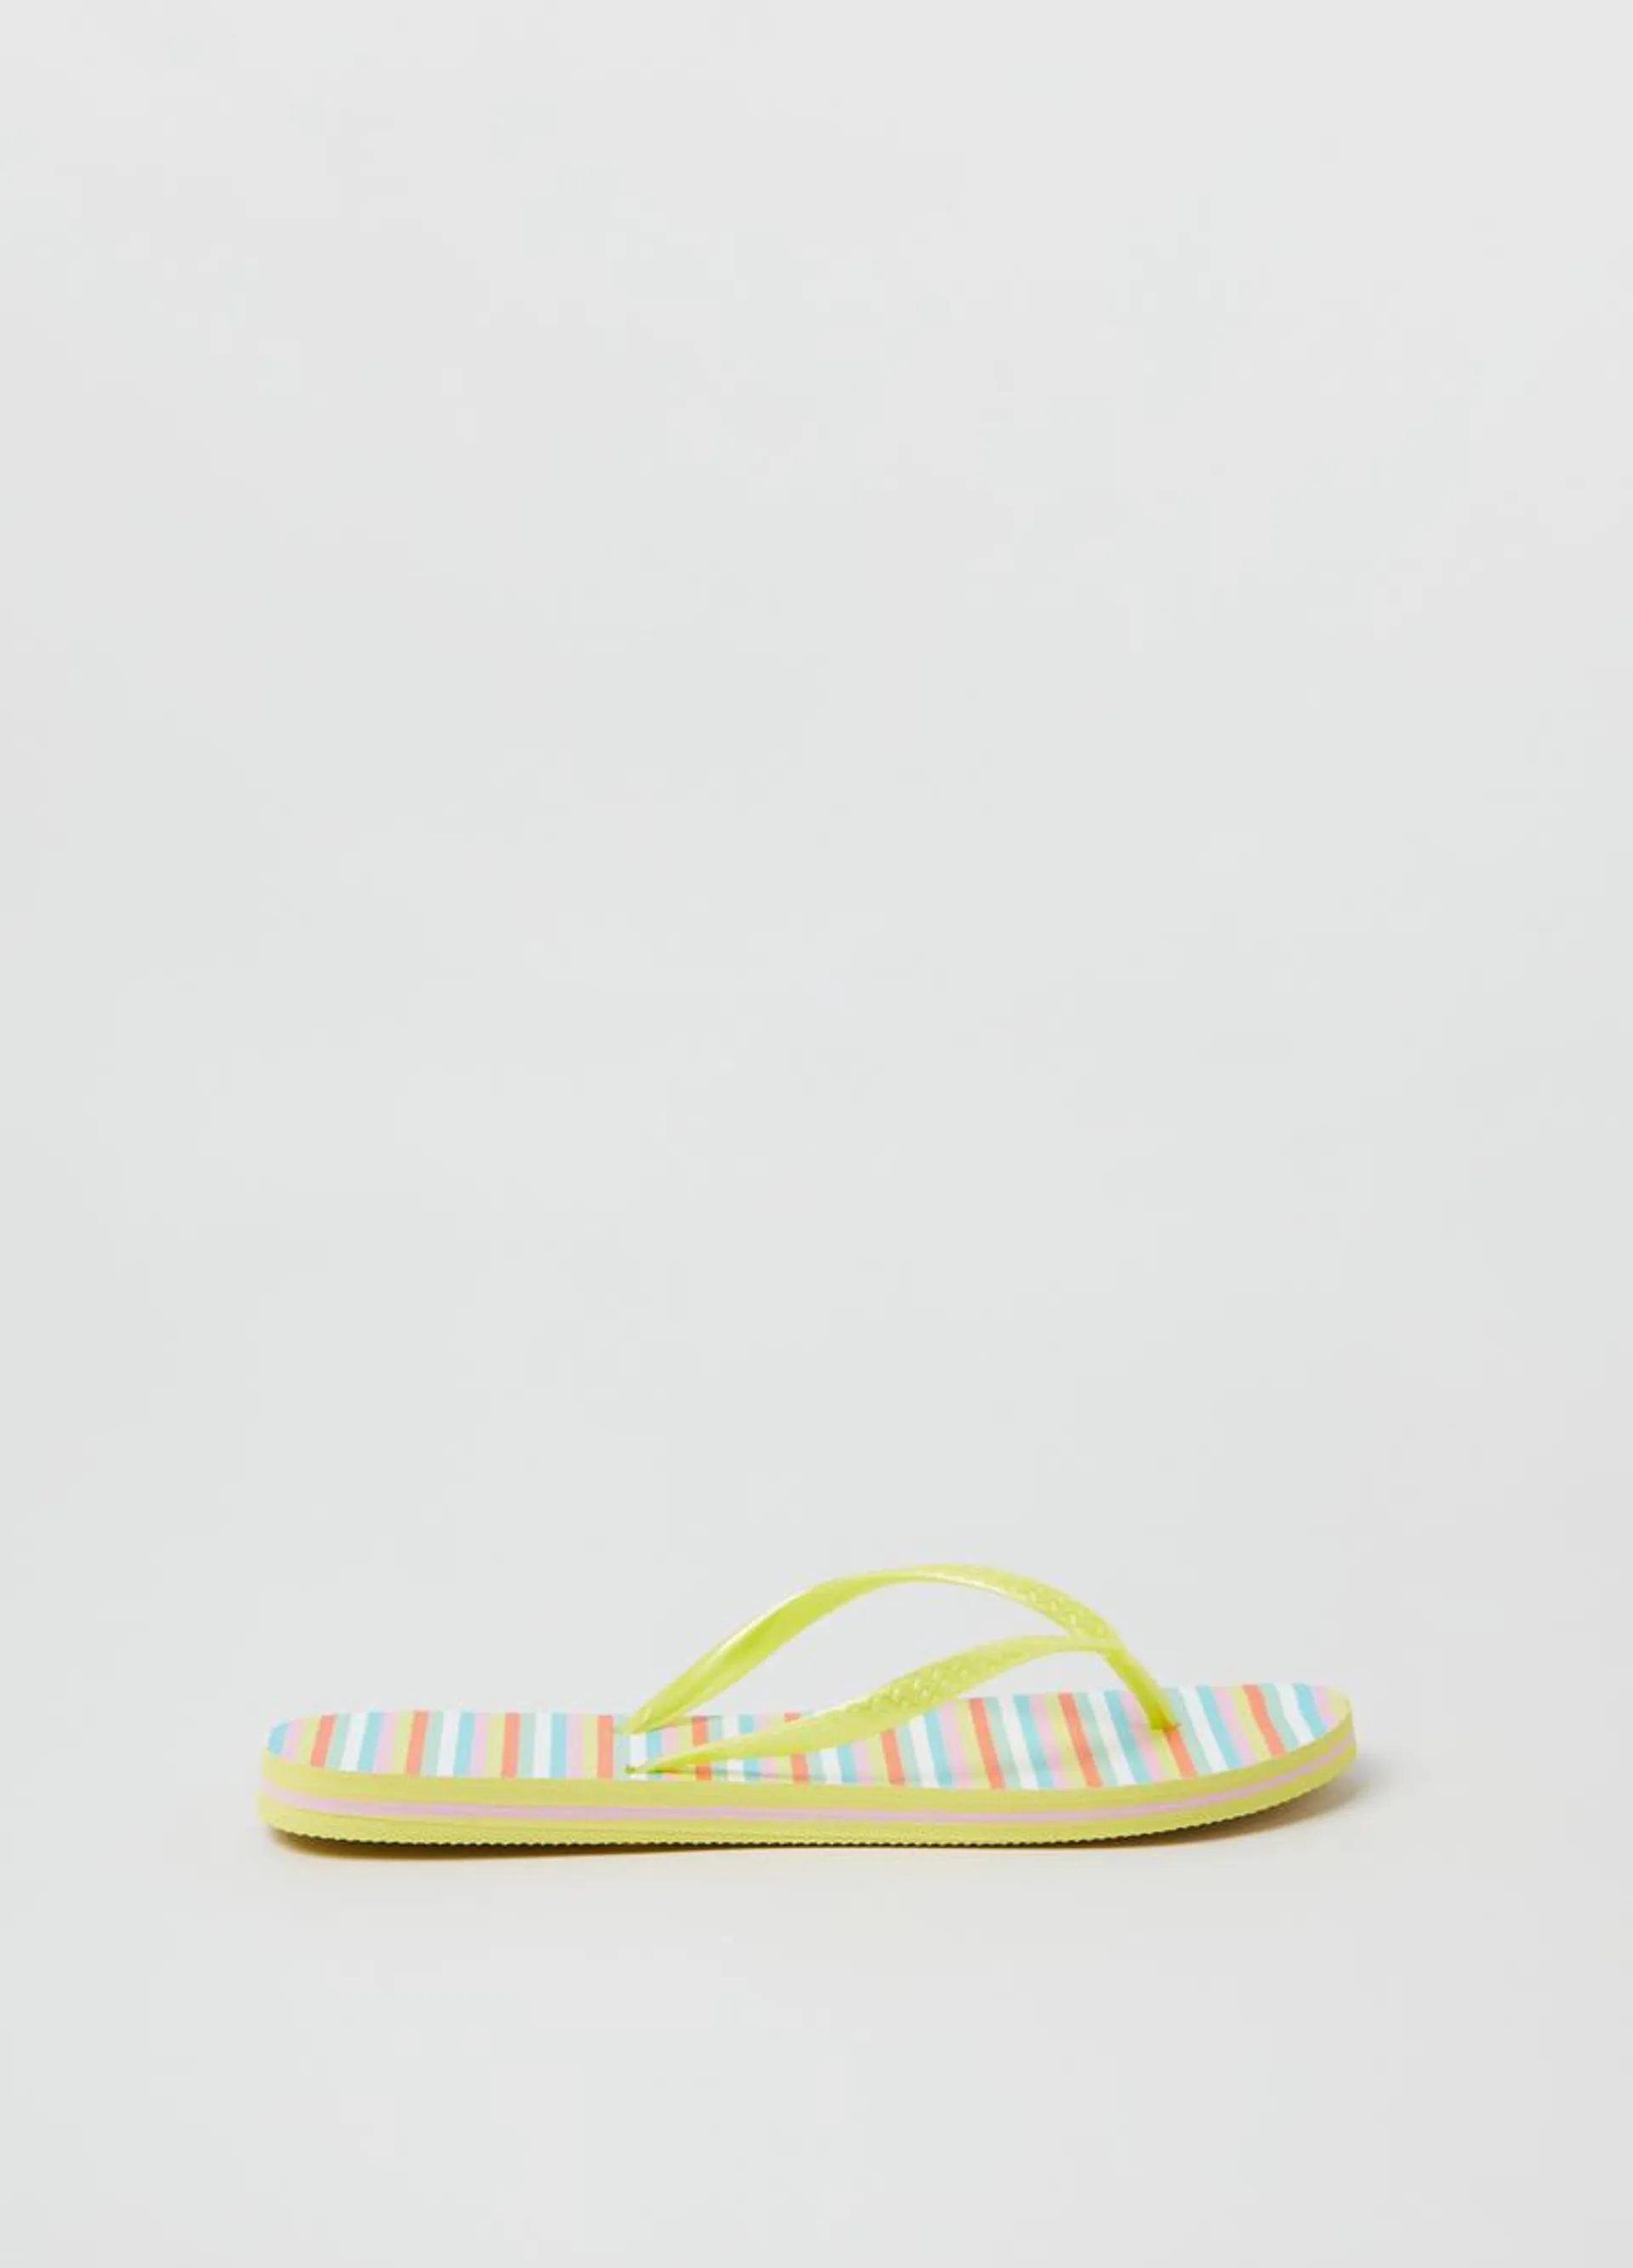 Thong sandals with thin stripes print